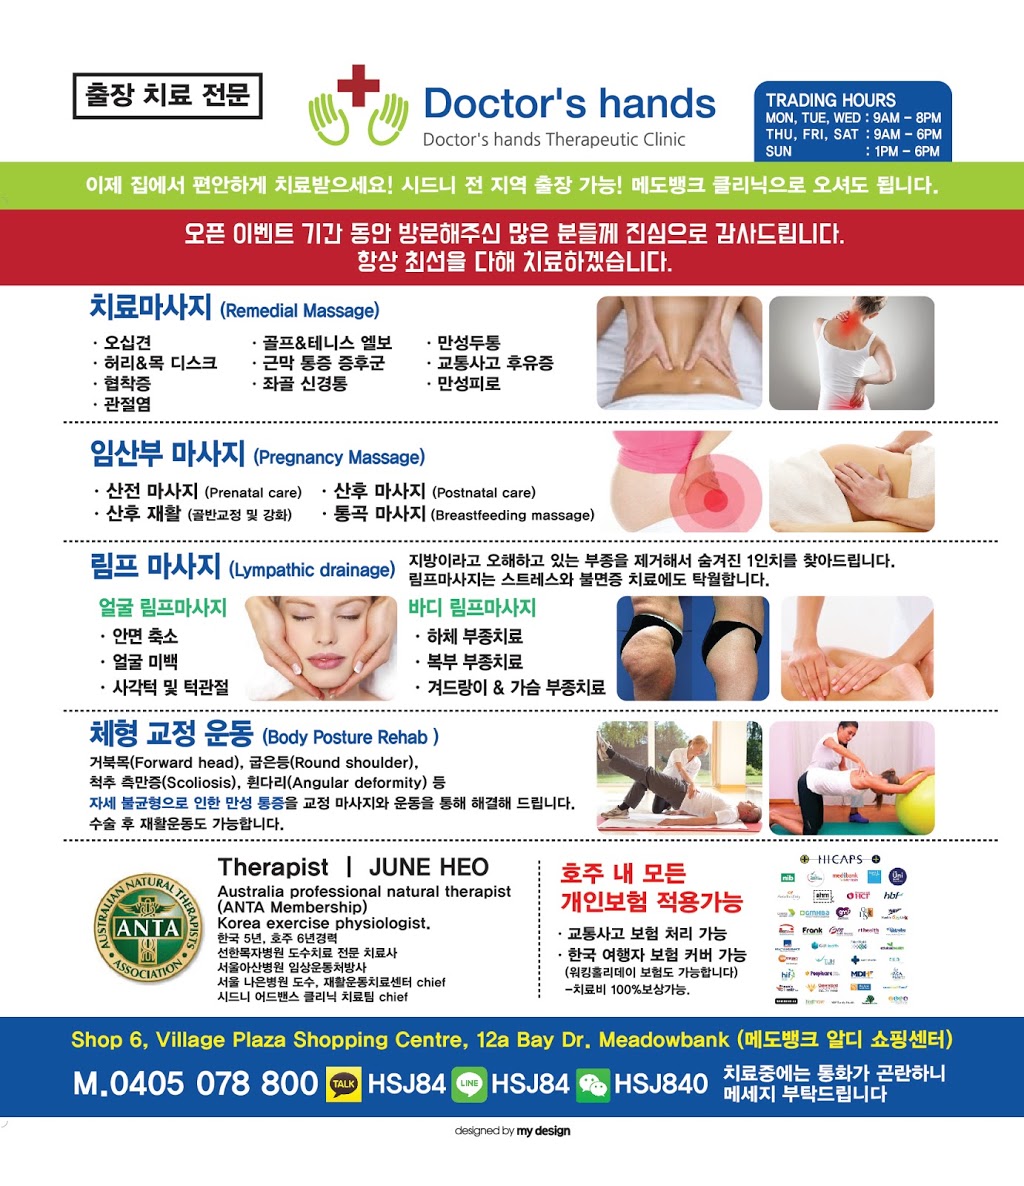 Doctors hands therapeutic clinic | hospital | Australia, New South Wales, Meadowbank, Shop6,12a Village plaza 11bay Drive | 0405078800 OR +61 405 078 800